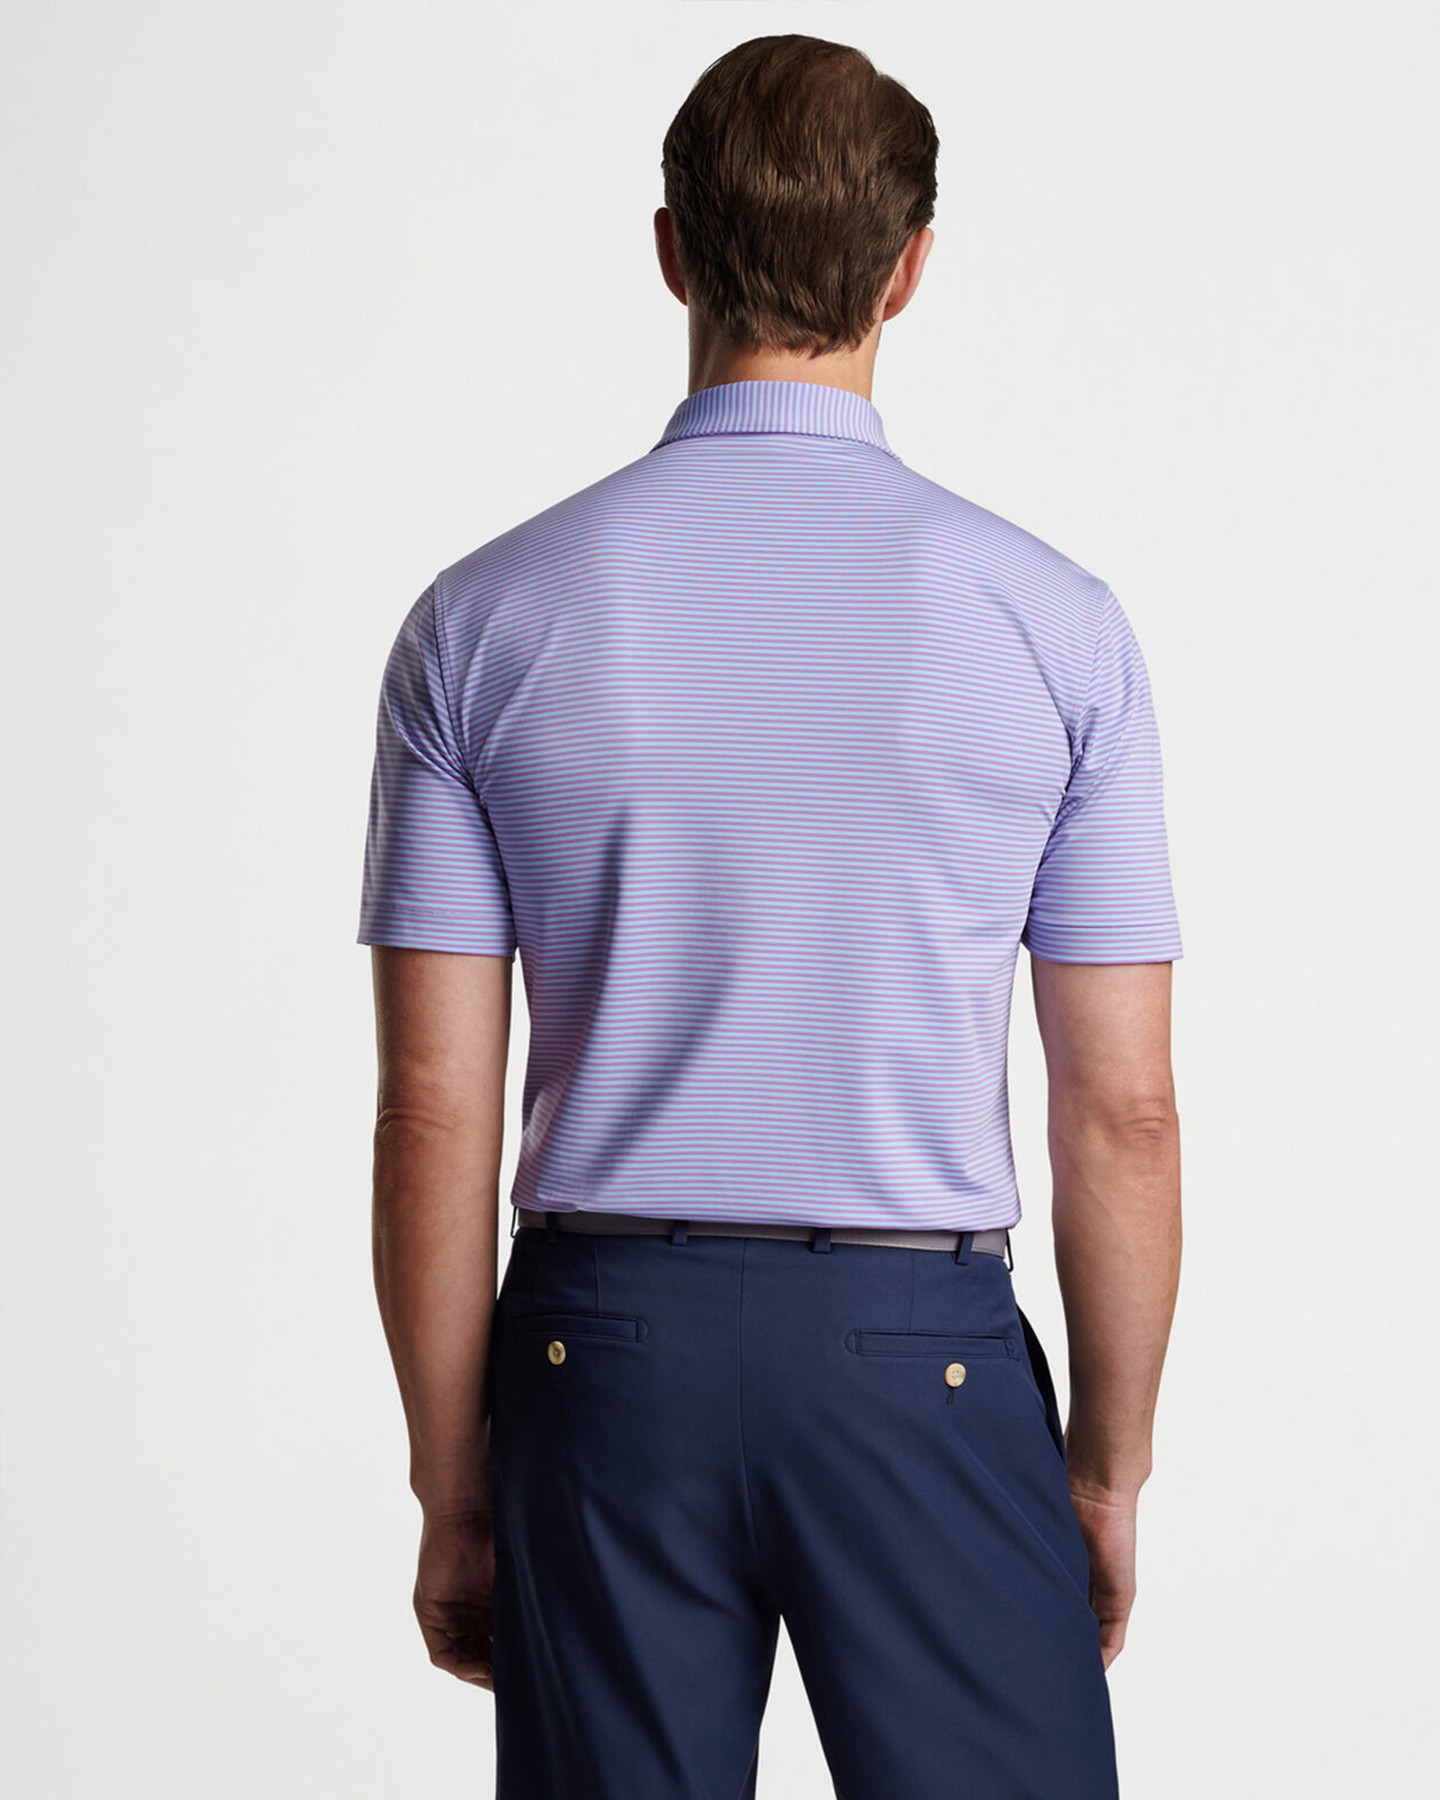 HALES PERFORMANCE JERSEY POLO - DRAGONFLY